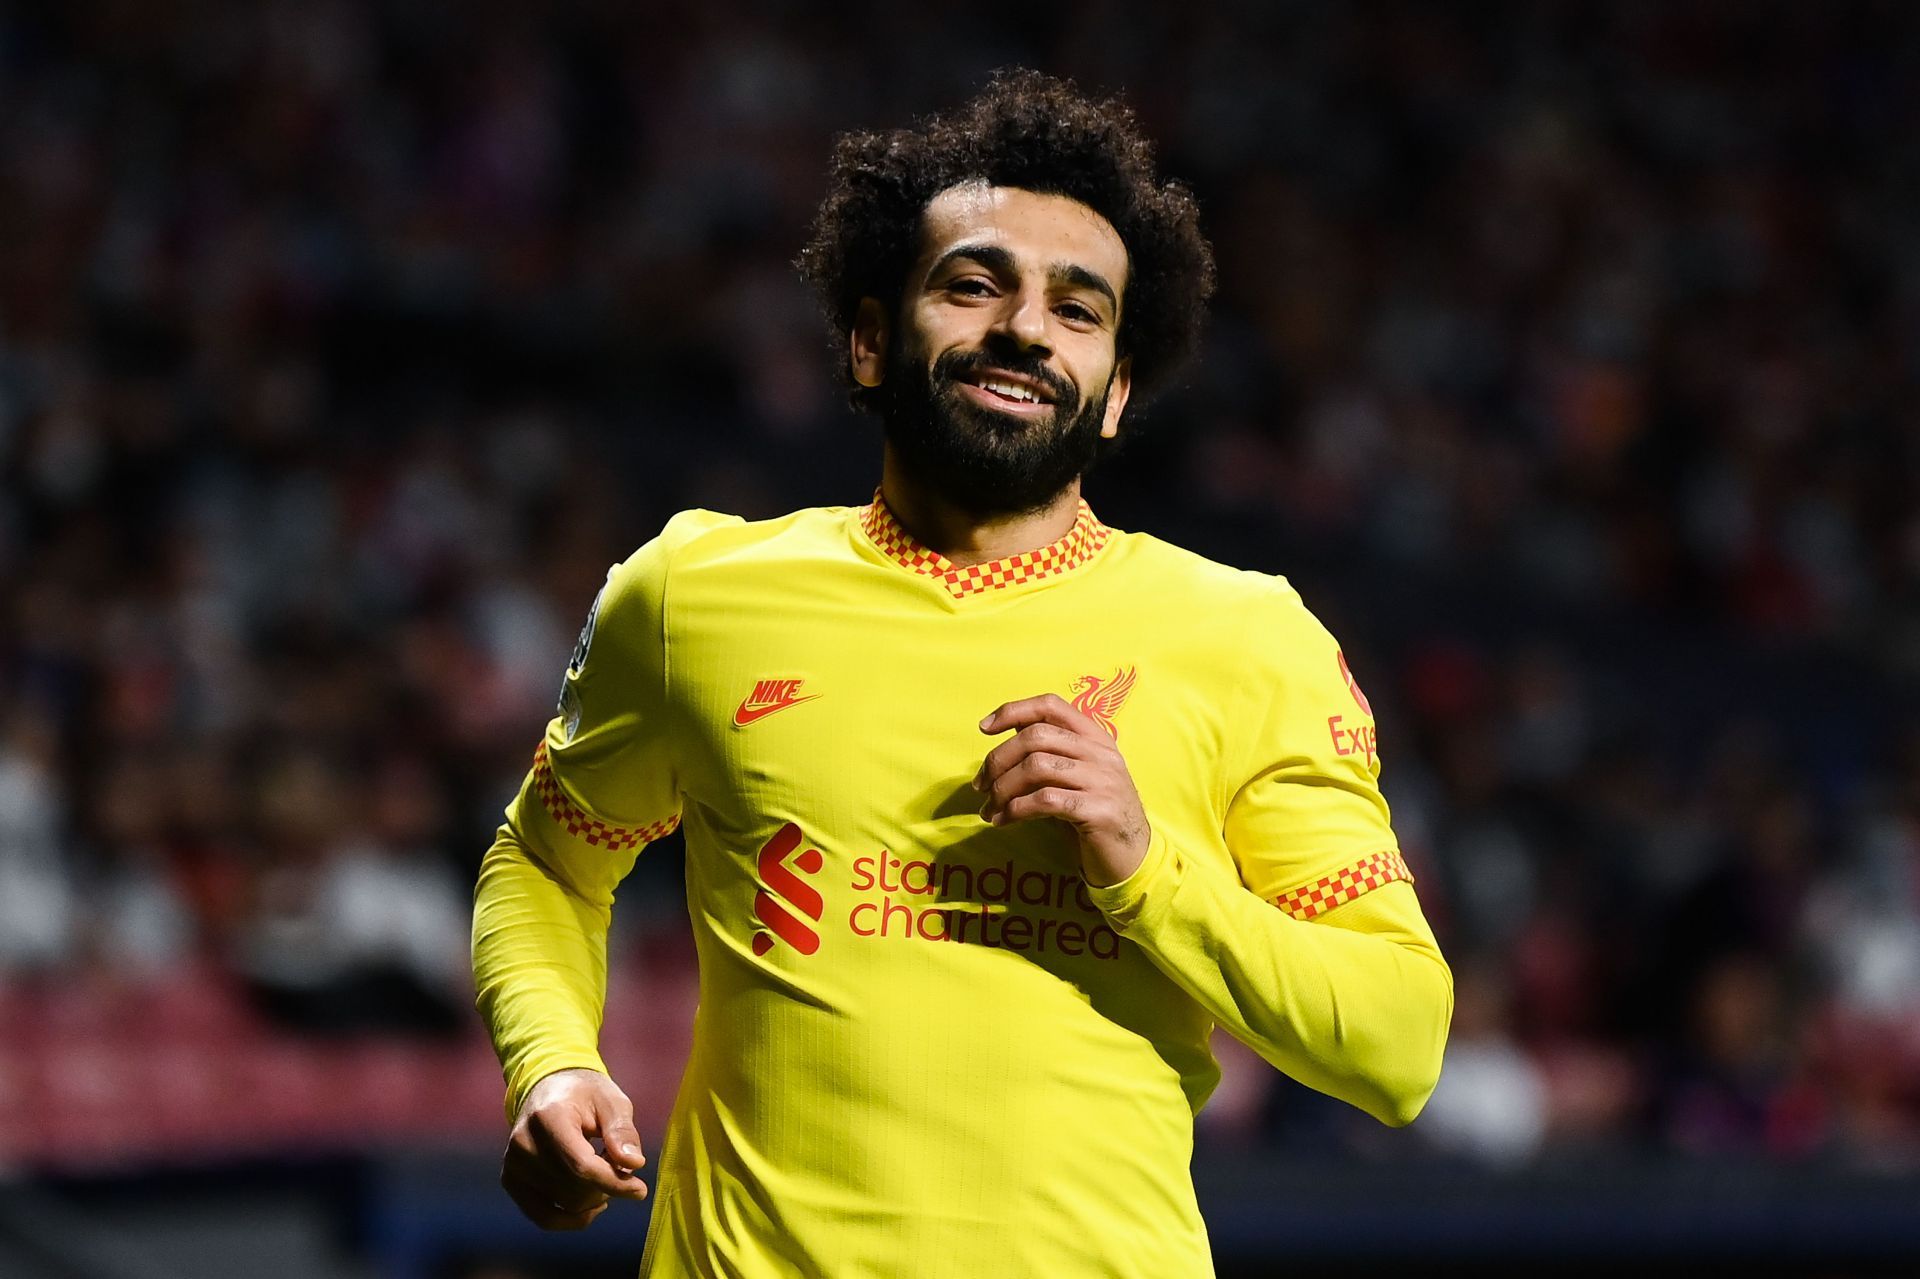 Mohamed Salah is one of the most in-form players in the world at the moment.